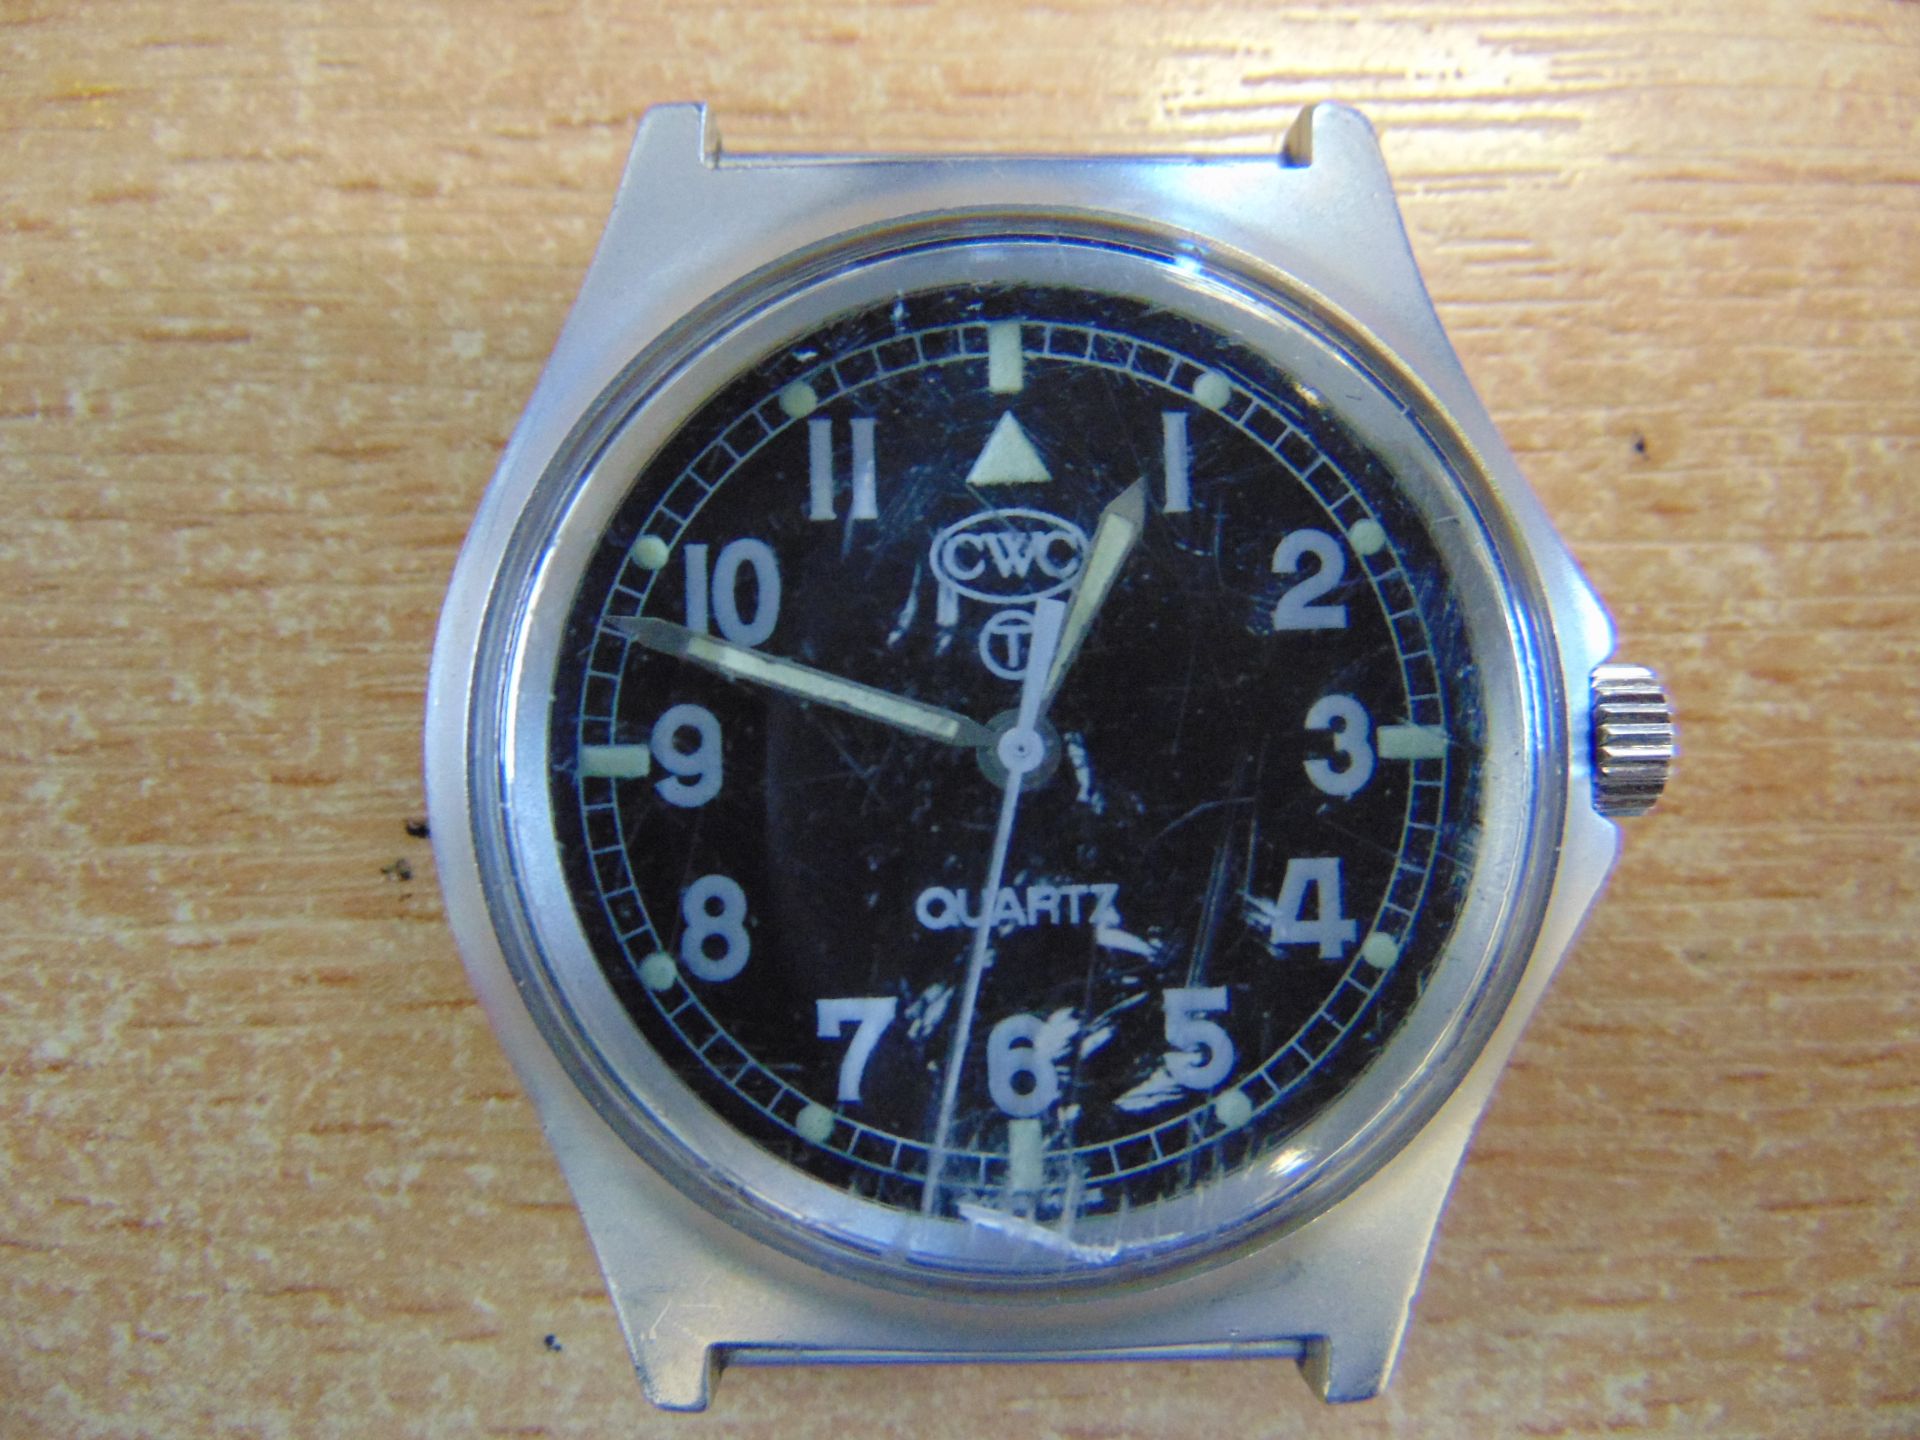 Rare CWC 0552 R.Marines/Navy Issue Service Watch Nato Marks Date 1989, New Battery/Strap - Image 2 of 5